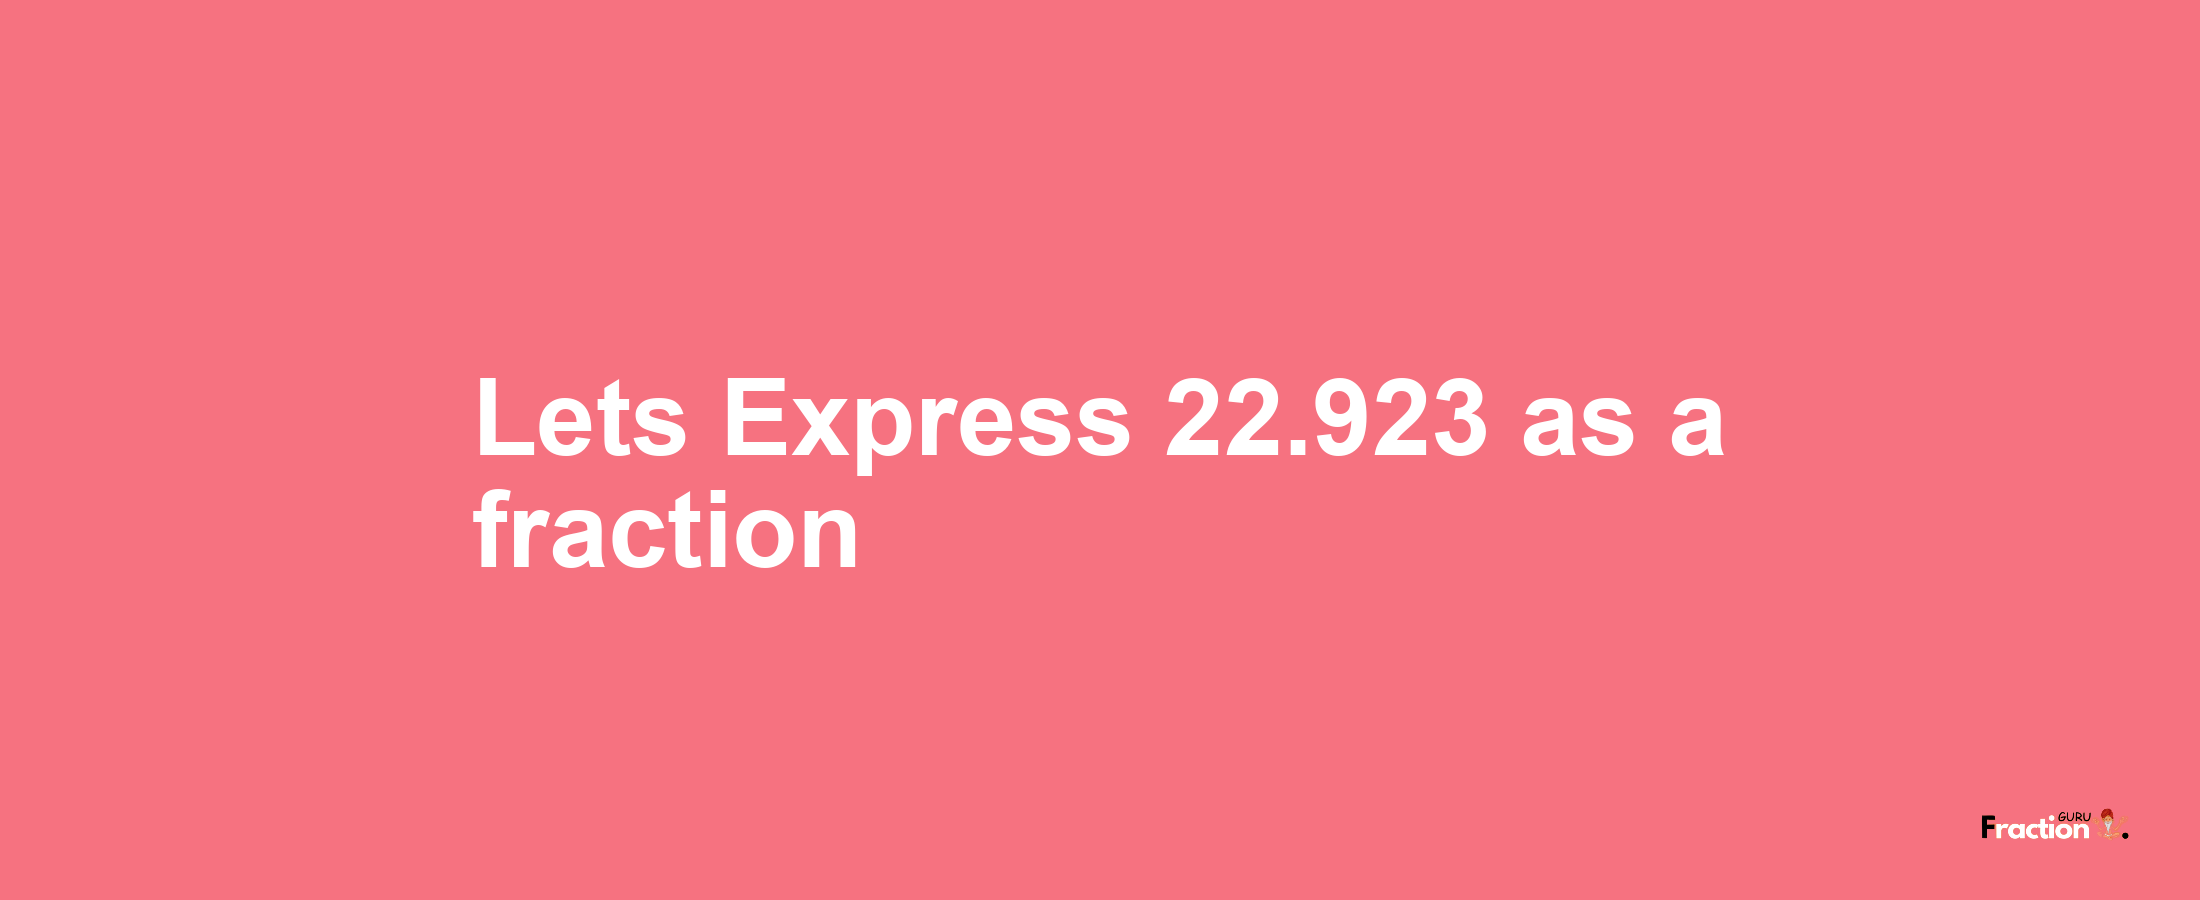 Lets Express 22.923 as afraction